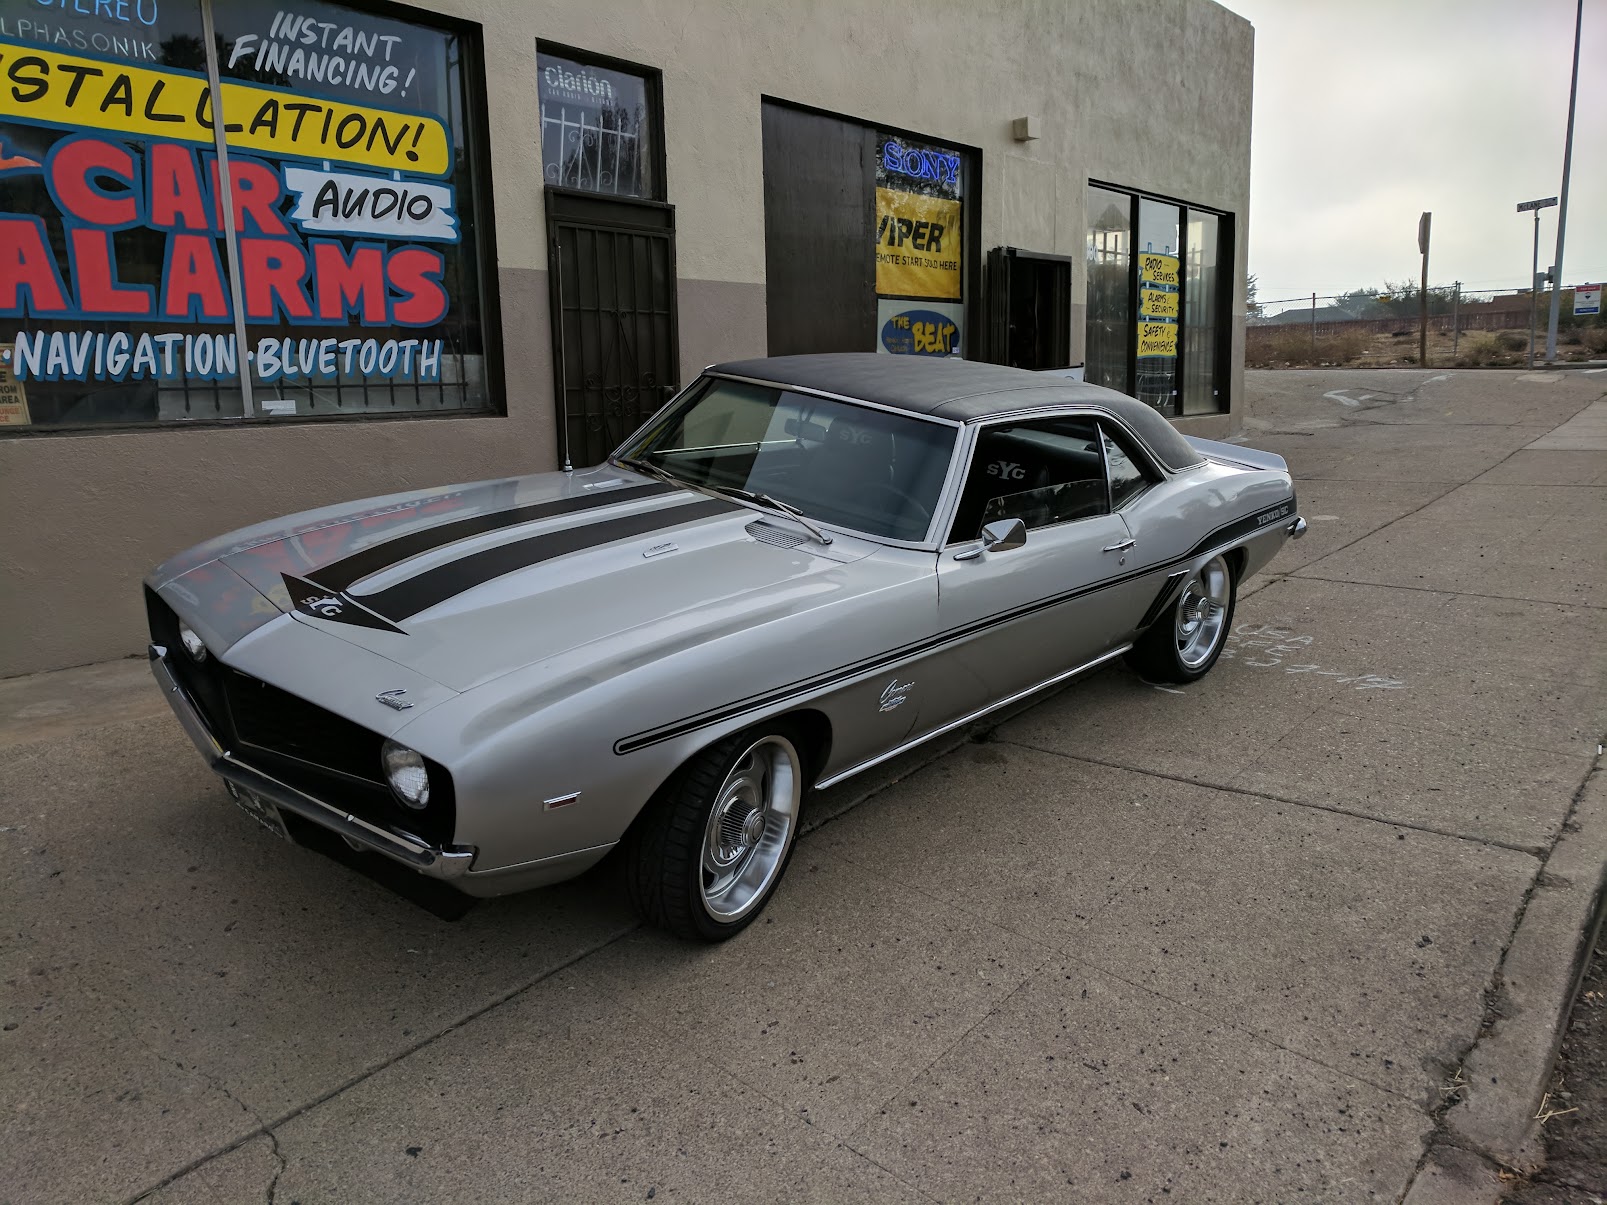 Gray Car in Front of the Store